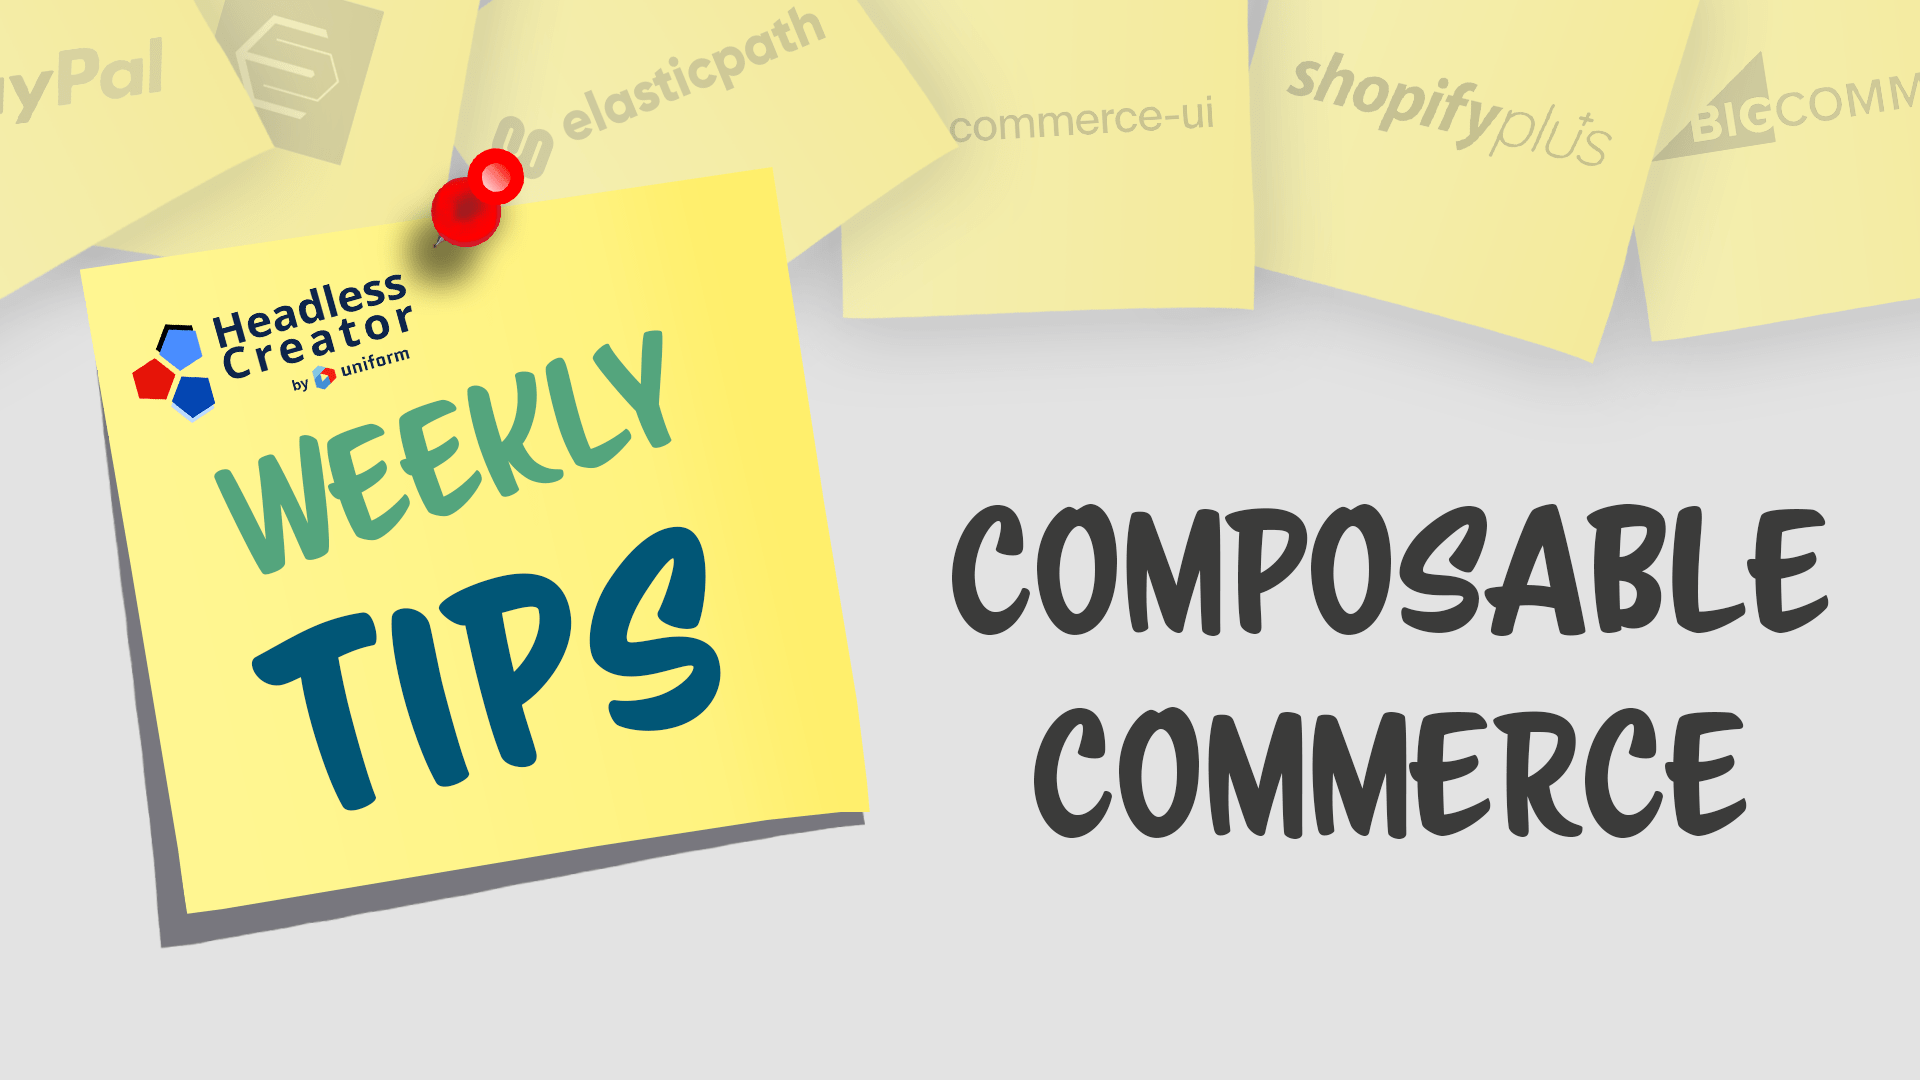 Weekly Tips: Composable Commerce